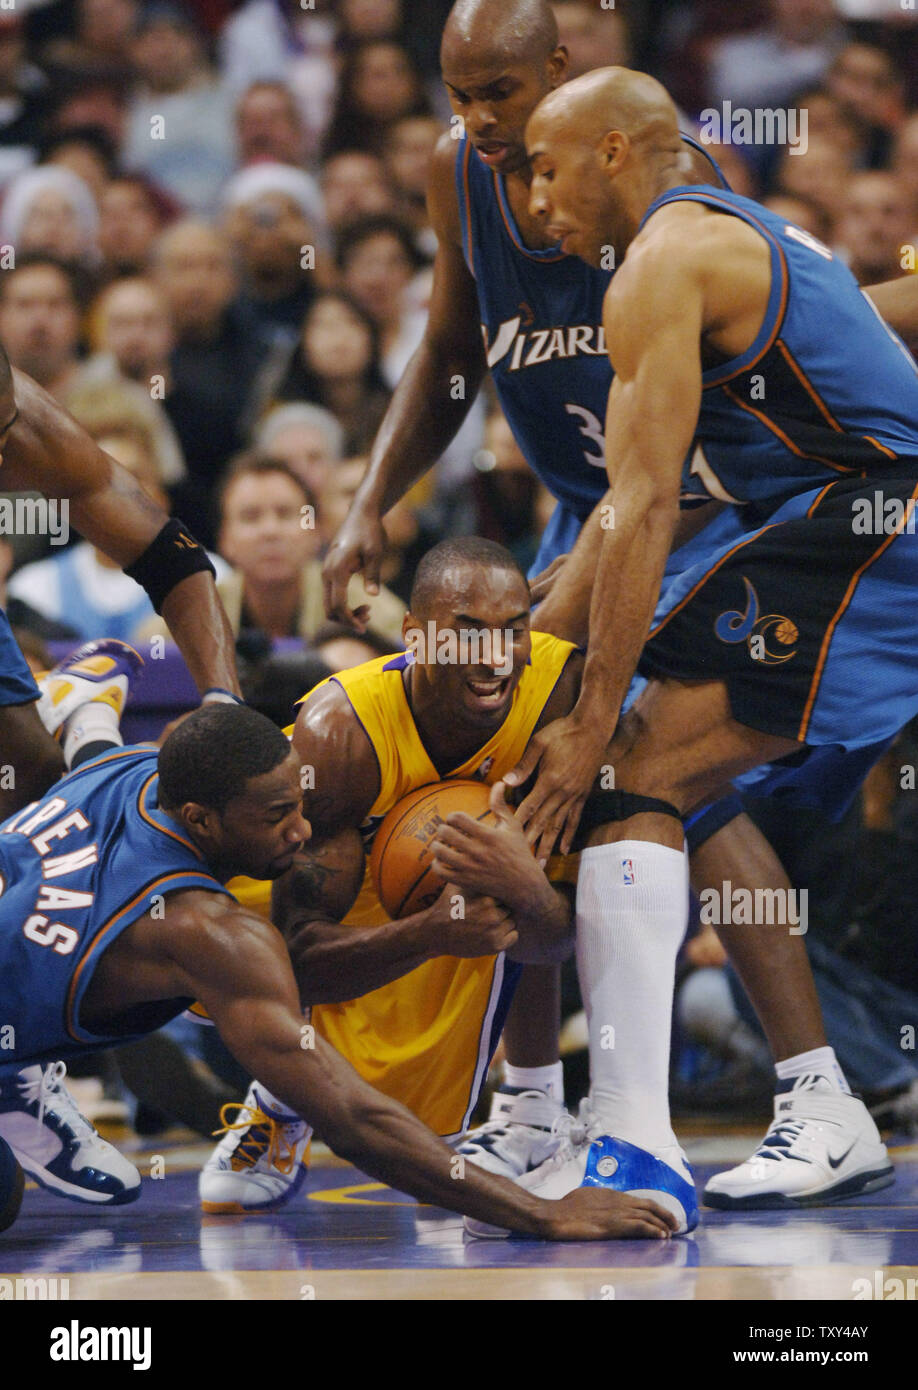 Los Angeles Lakers guard Kobe Bryant (C) fights for control of the ball as he is surrounded by Washingtron Wizzards Gilbert Arenas, Brendan Haywood and Michael Ruffin during fourth quarter NBA action at Staples Center in Los Angeles December 16, 2005. The Lakers defeated the Wizzards 97-91. (UPI Photo/Jim Ruymen) Stock Photo